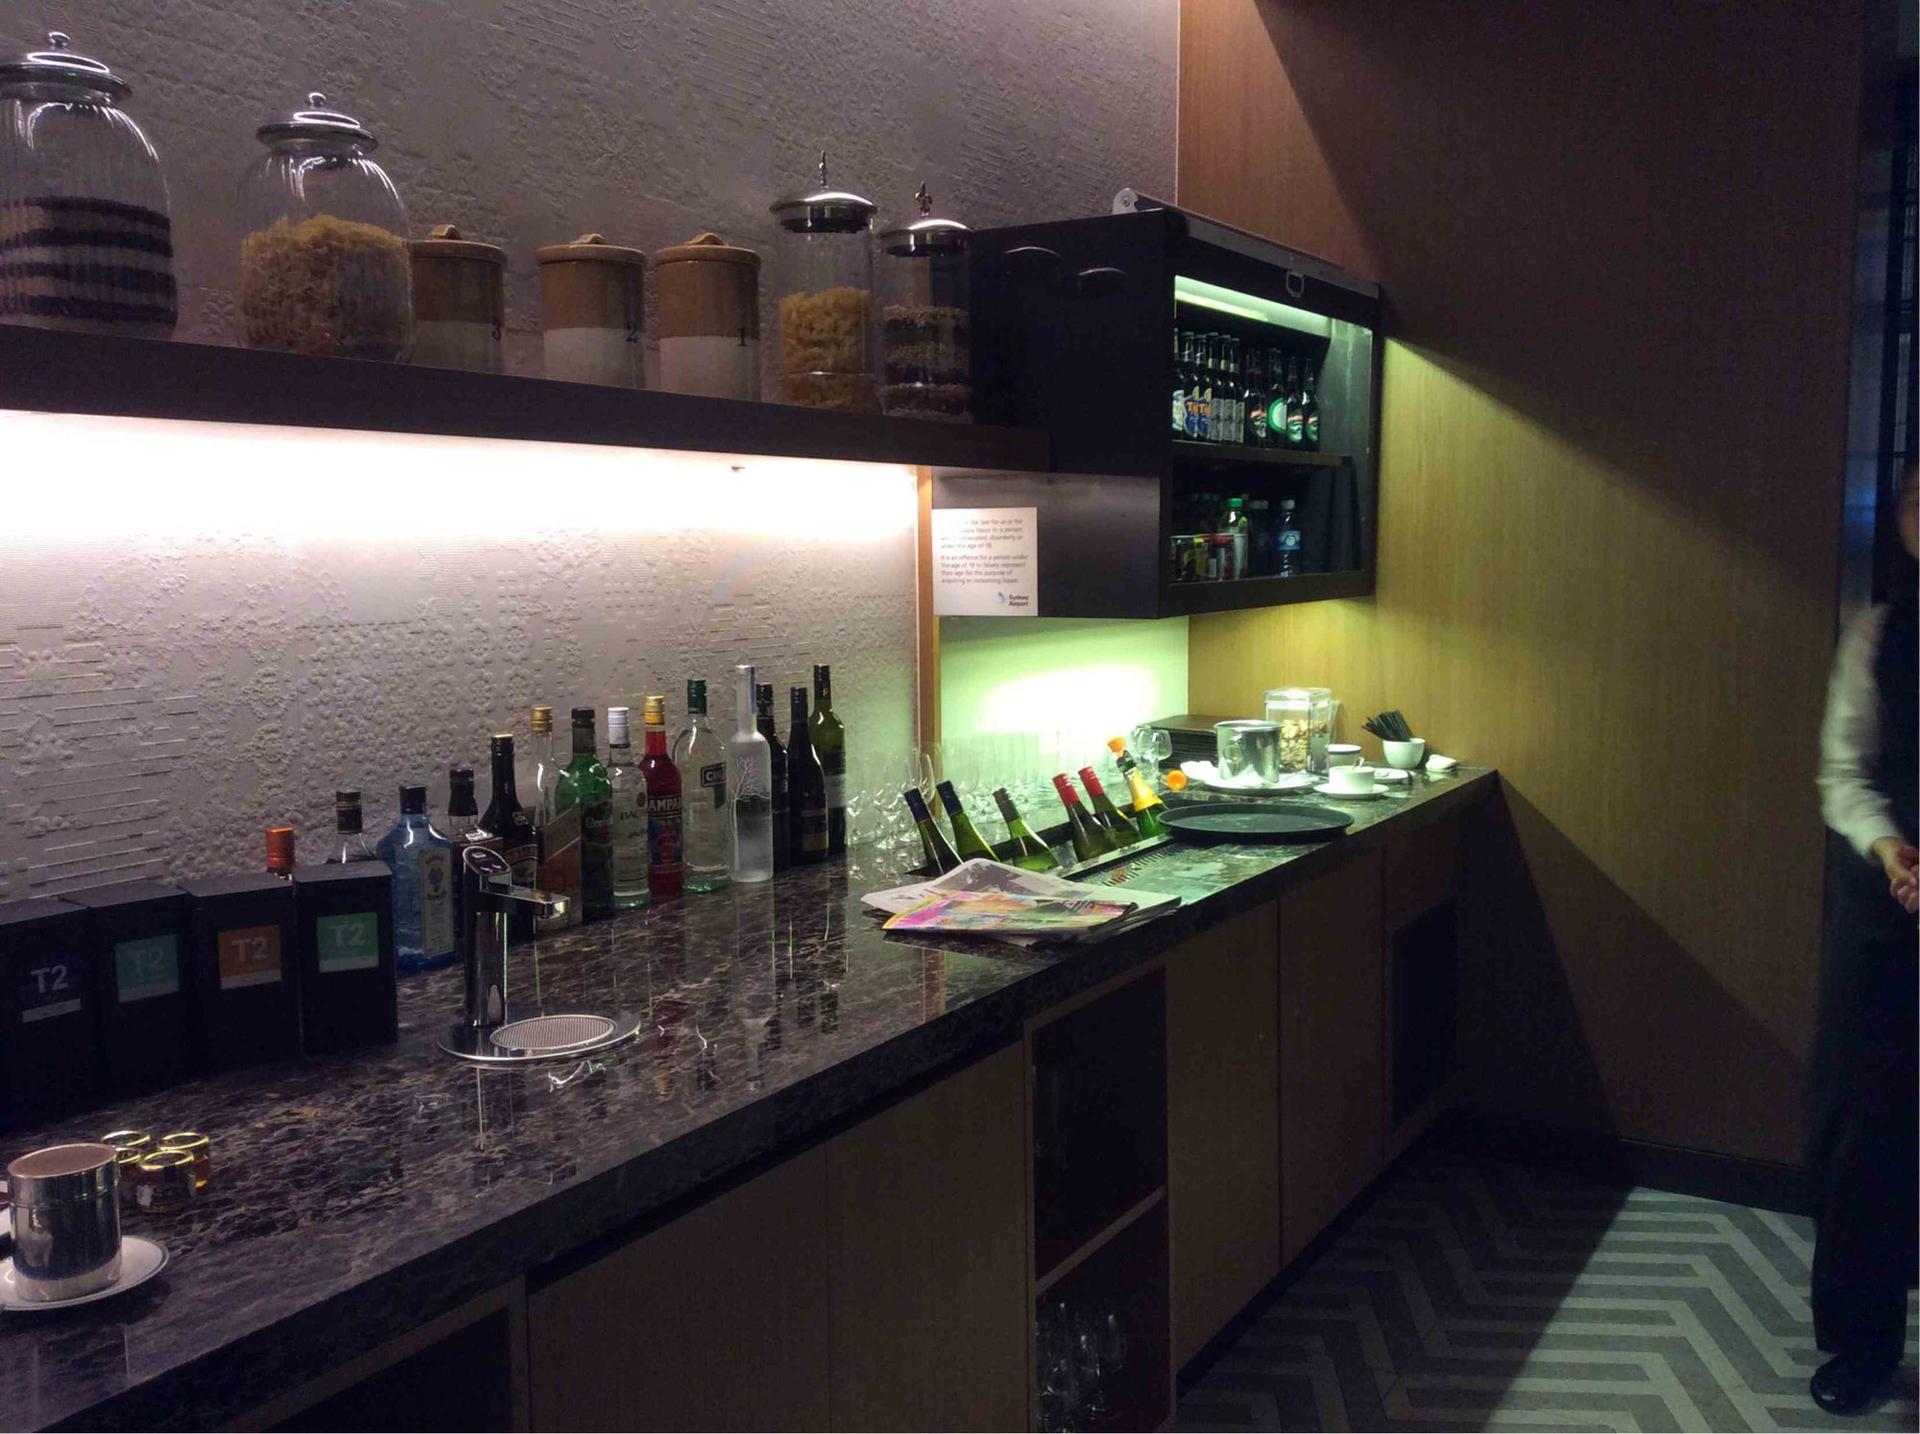 Singapore Airlines SilverKris First Class Lounge image 10 of 17